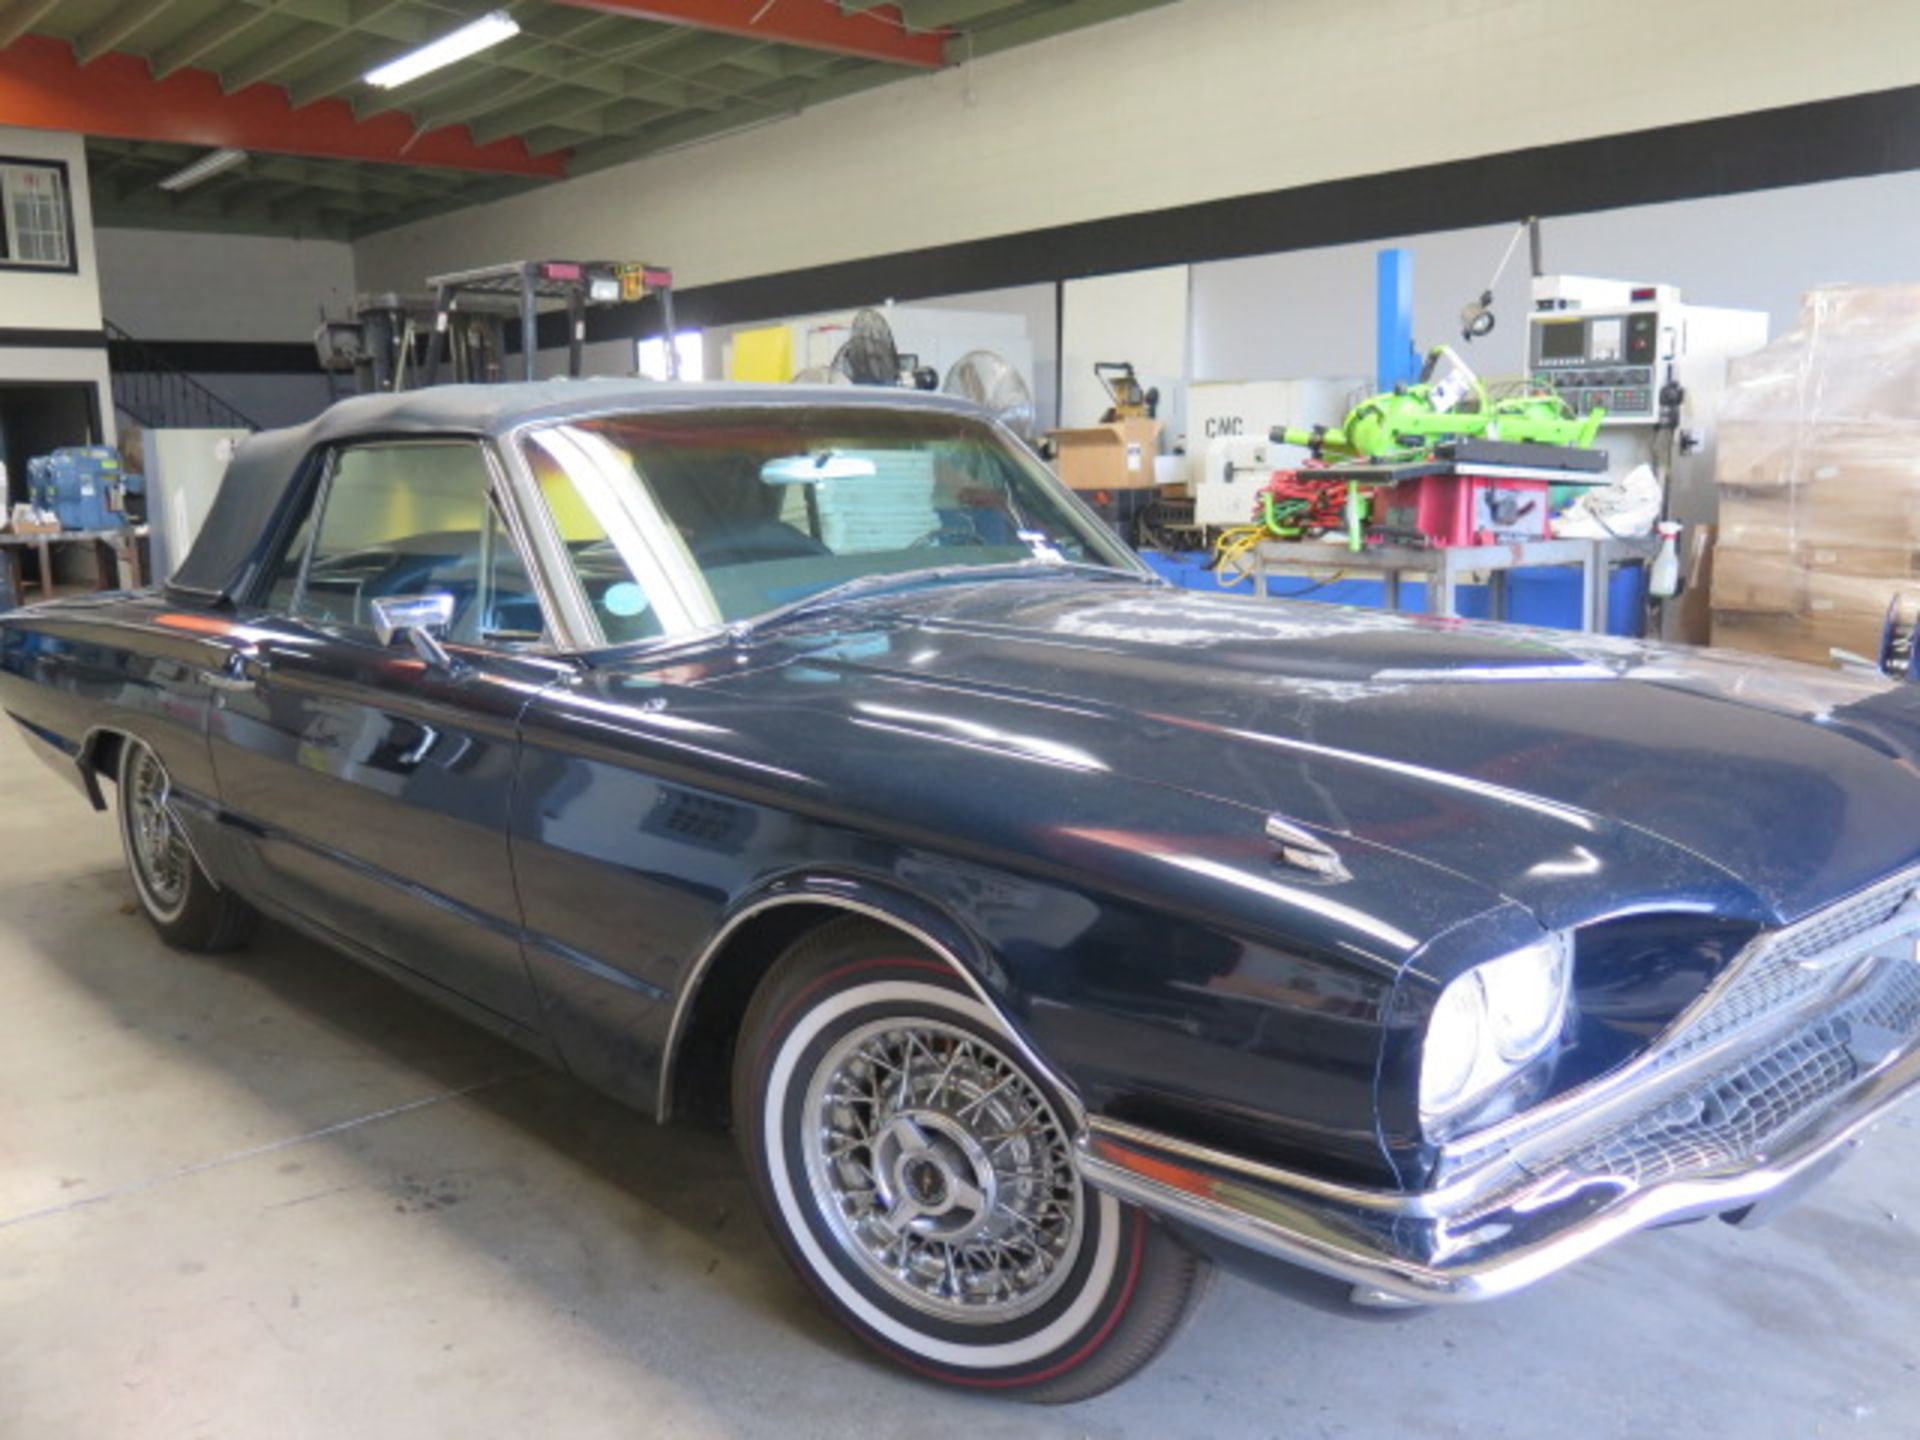 1966 Ford Thunderbird Convertible, Rare Q Code 428 w/ 3x2 Carburetors. (SOLD AS-IS - NO WARRANTY) - Image 3 of 45